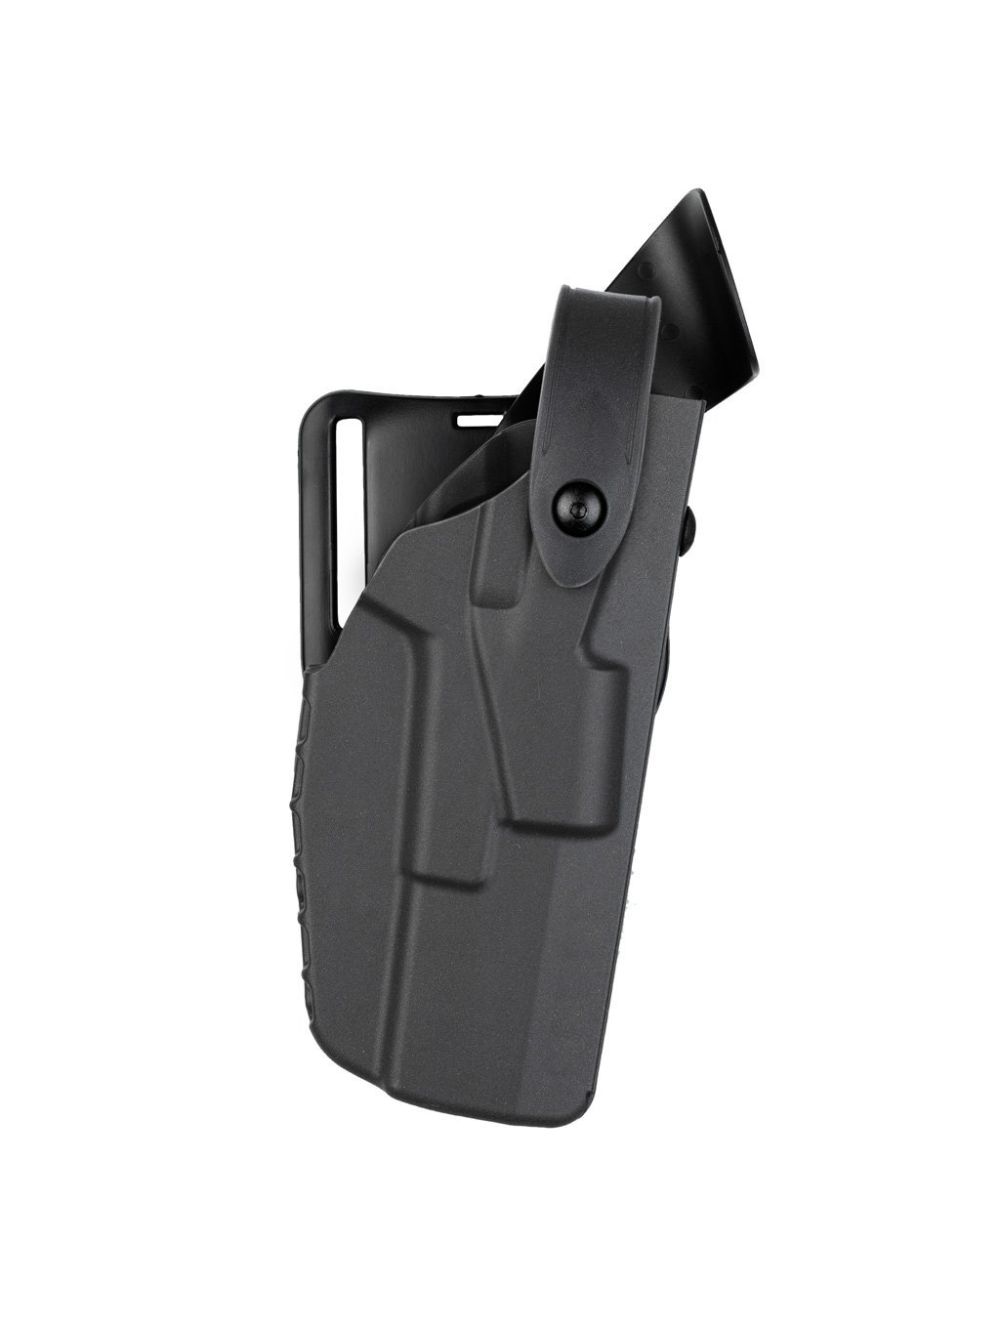 Model 7360 7TS ALS/SLS Mid-Ride Duty Holster for Smith & Wesson M&P 2.0 9